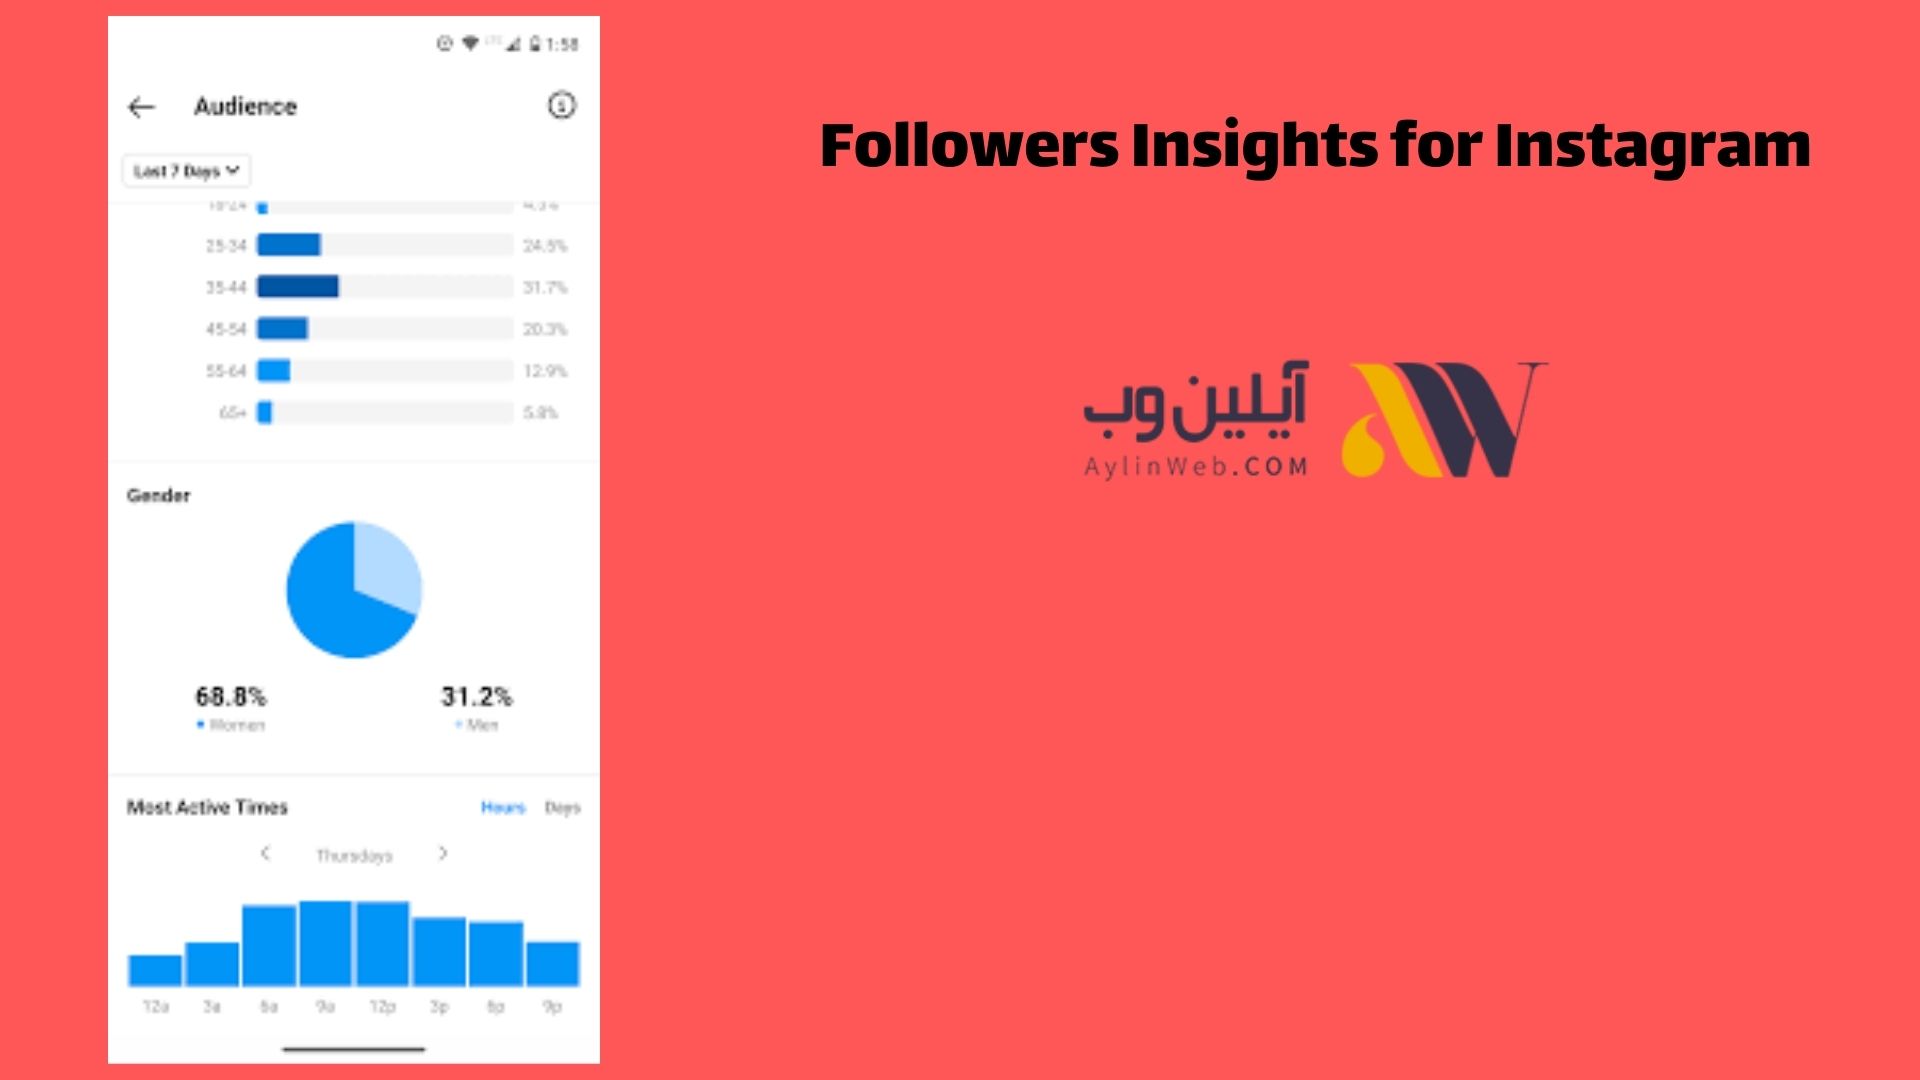 Followers Insights for Instagram